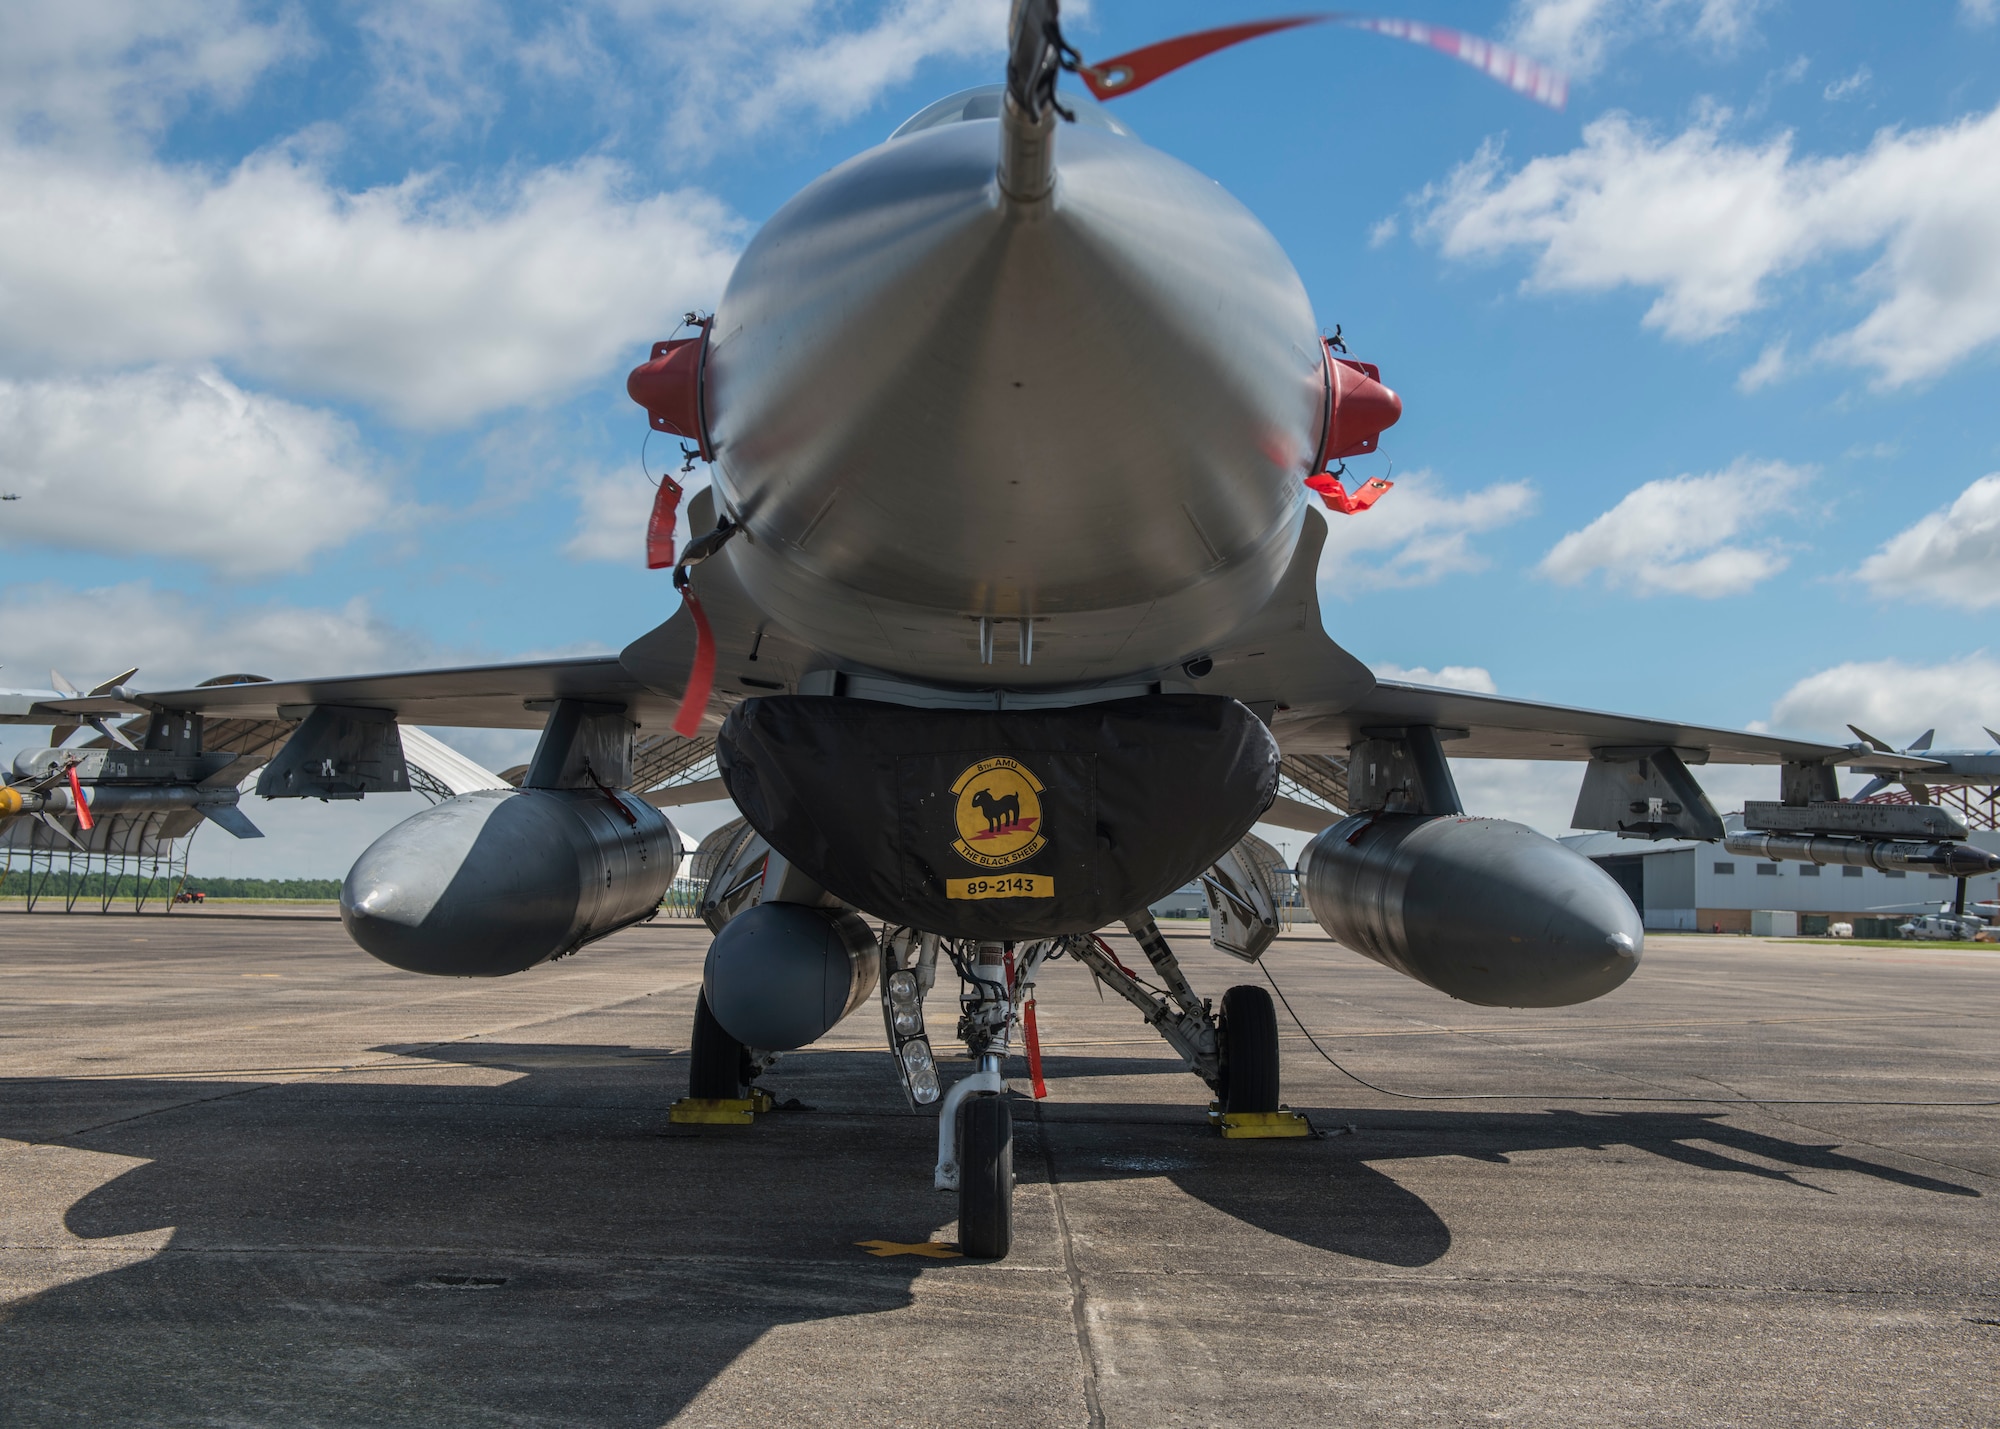 Holloman's 8th Fighter Squadron deployed on a temporary duty location to Naval Air Station Joint Reserve Base New Orleans, La., and participated in a training exercise, March 29 to April 12, 2019. The 8th FS brought all the elements for a fully functioning squadron of 158 personnel and 15 F-16 s on this TDY, including eight F-16 Basic-Course student pilots. (U.S. Air Force photo by Airman 1st Class Kindra Stewart)